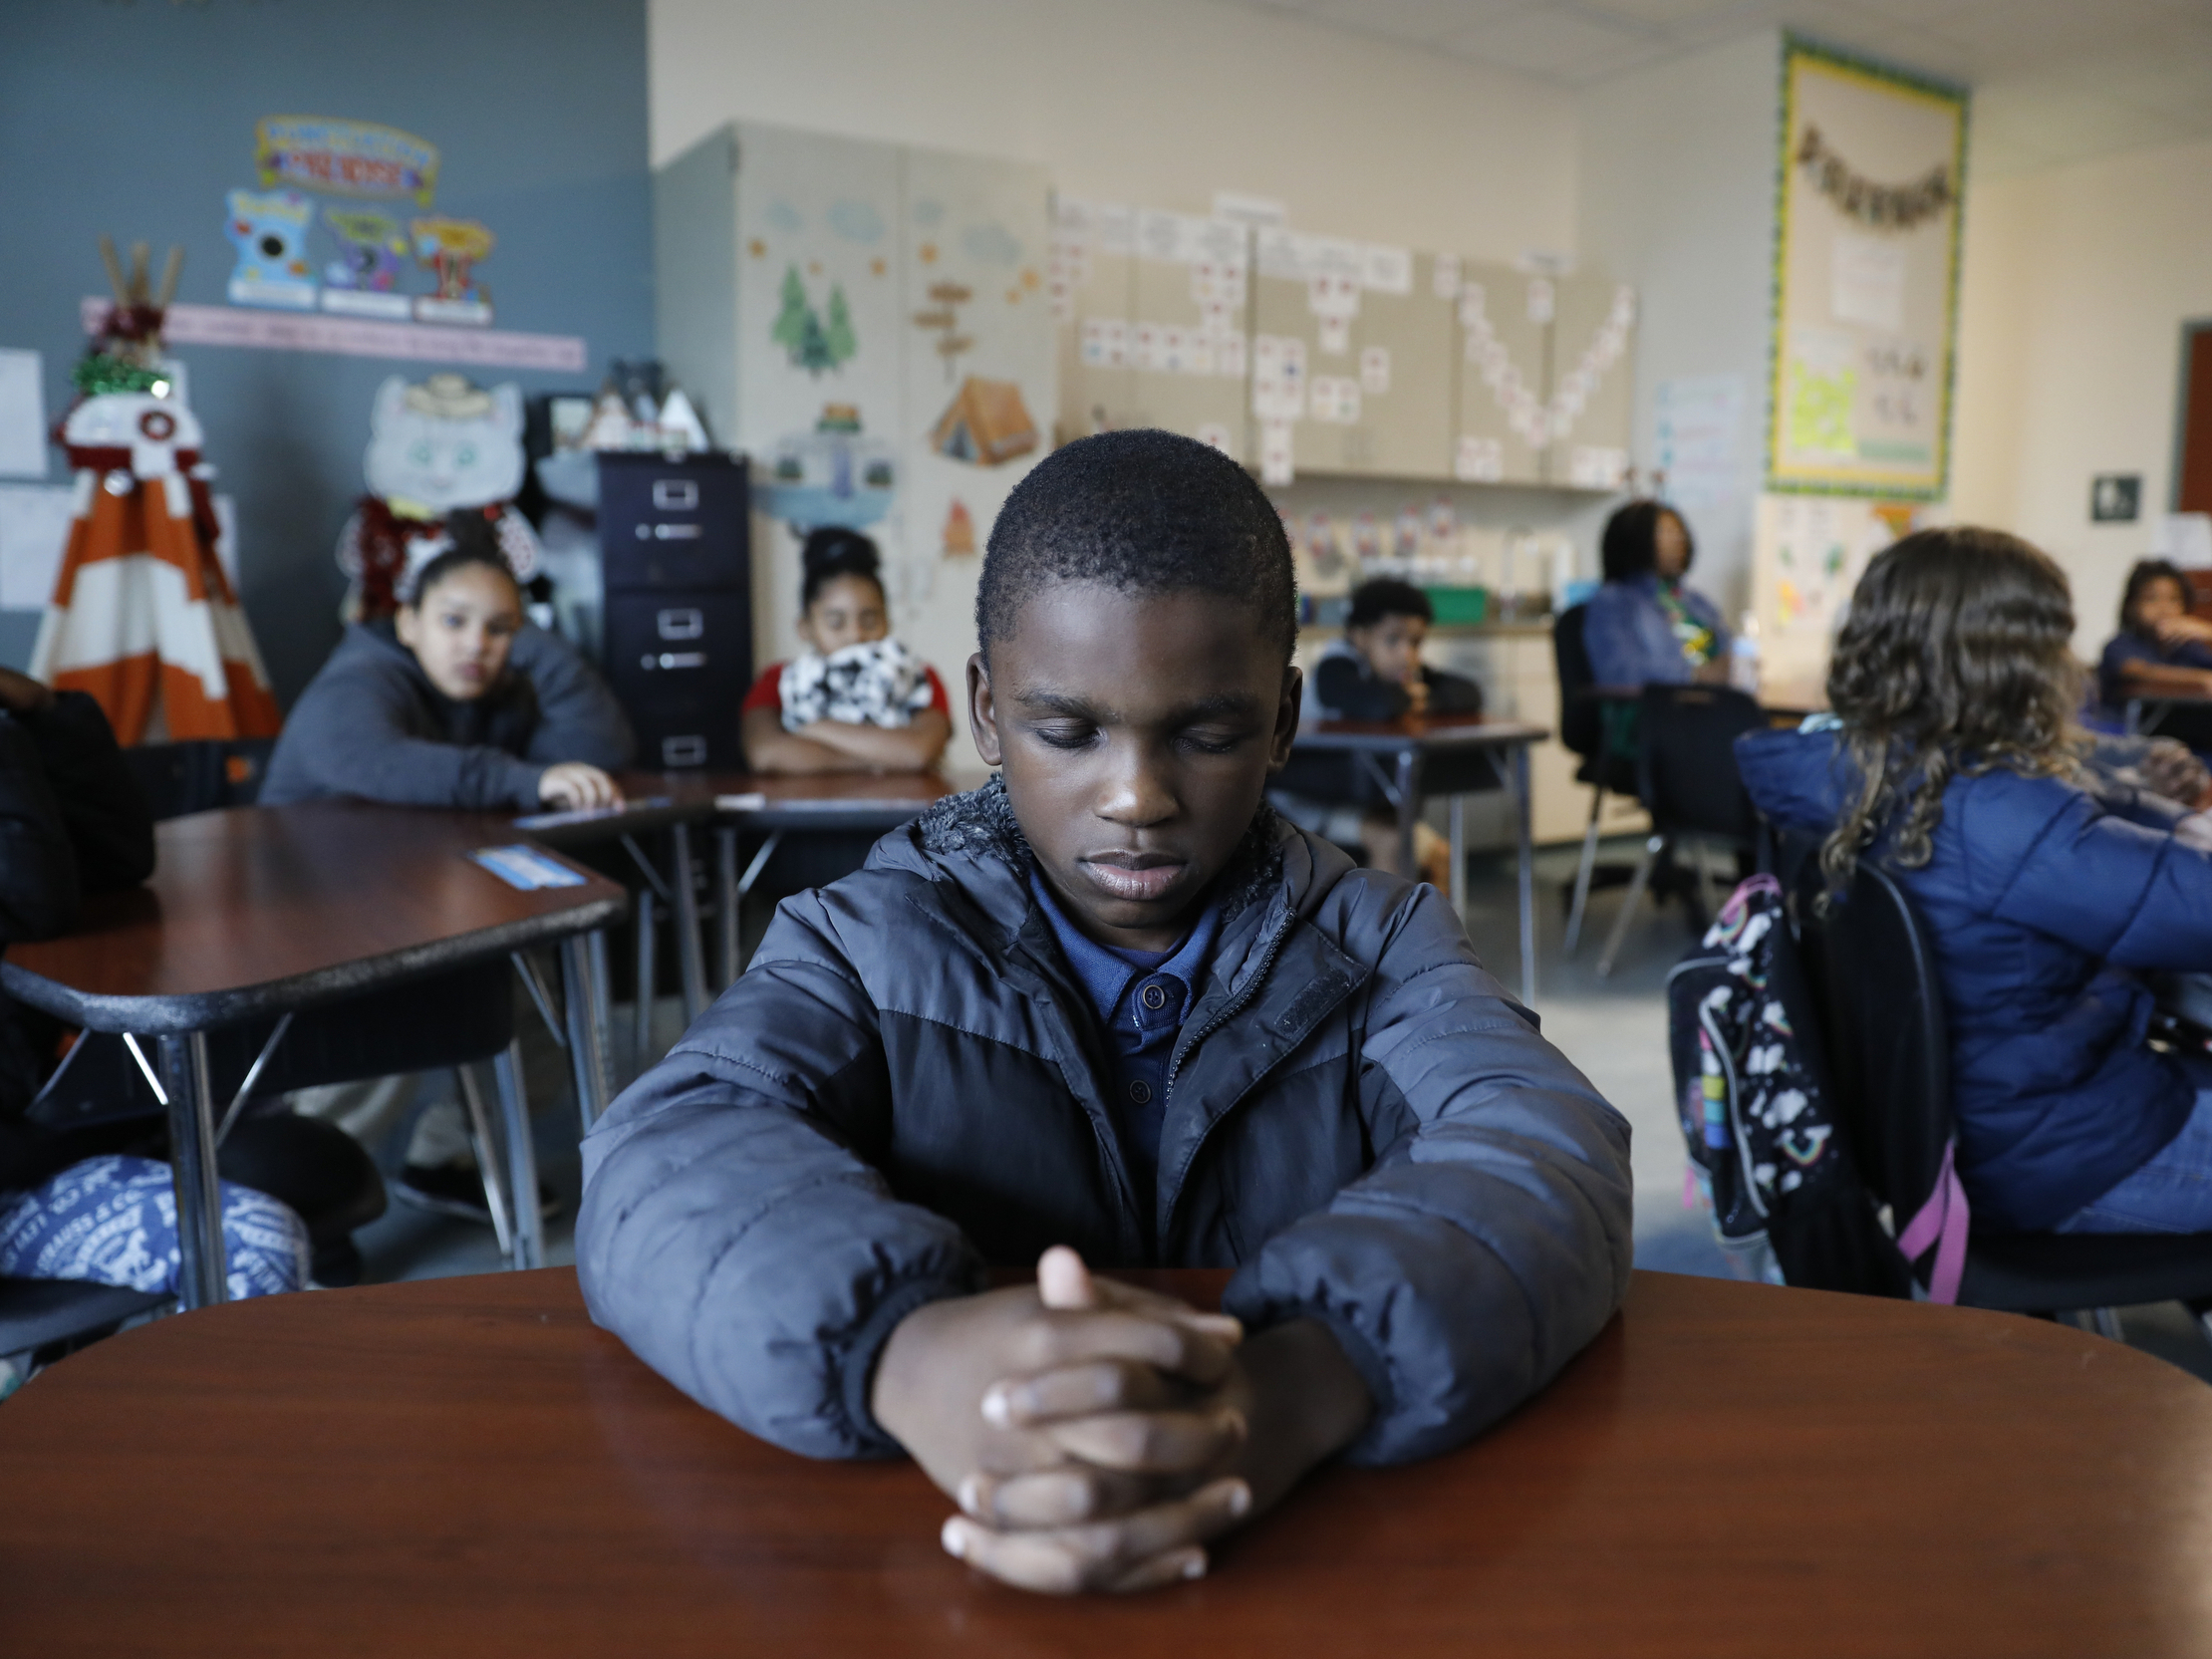 To help these school kids deal with trauma, mindfulness lessons over the loudspeaker